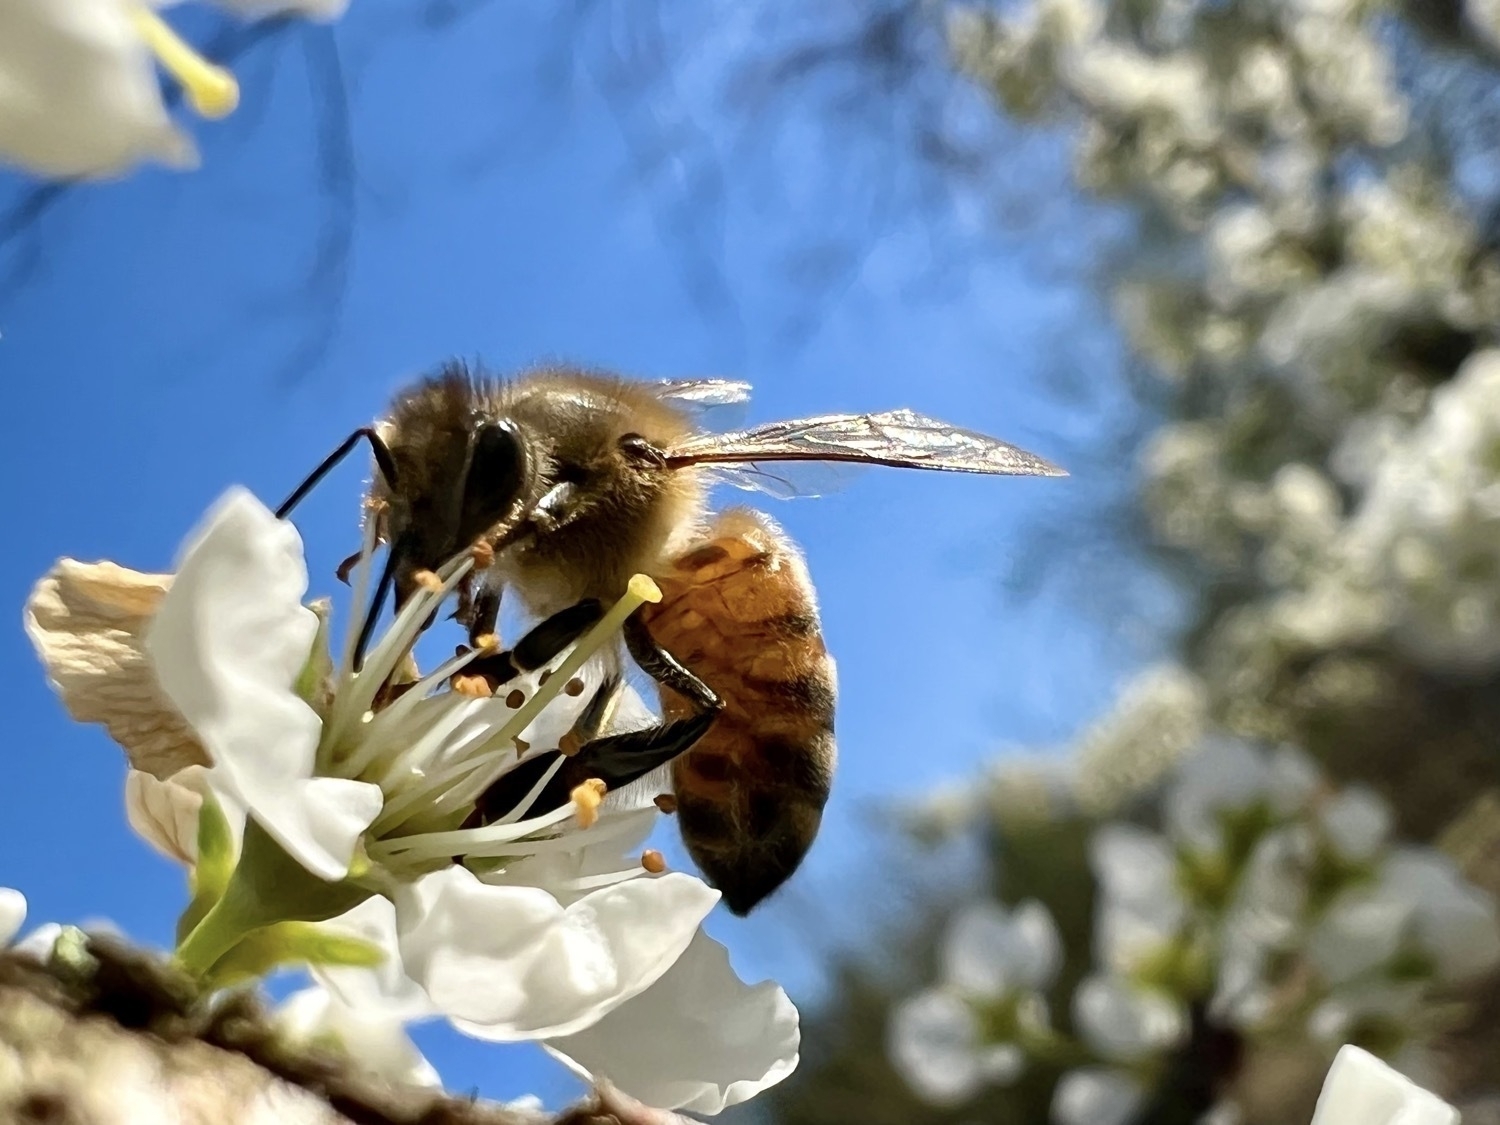 A honeybee collecting pollen from a white flower. in the background a branch of blurred flowers is on the right side of the image and a bright blue sky behind the bee and flower. 